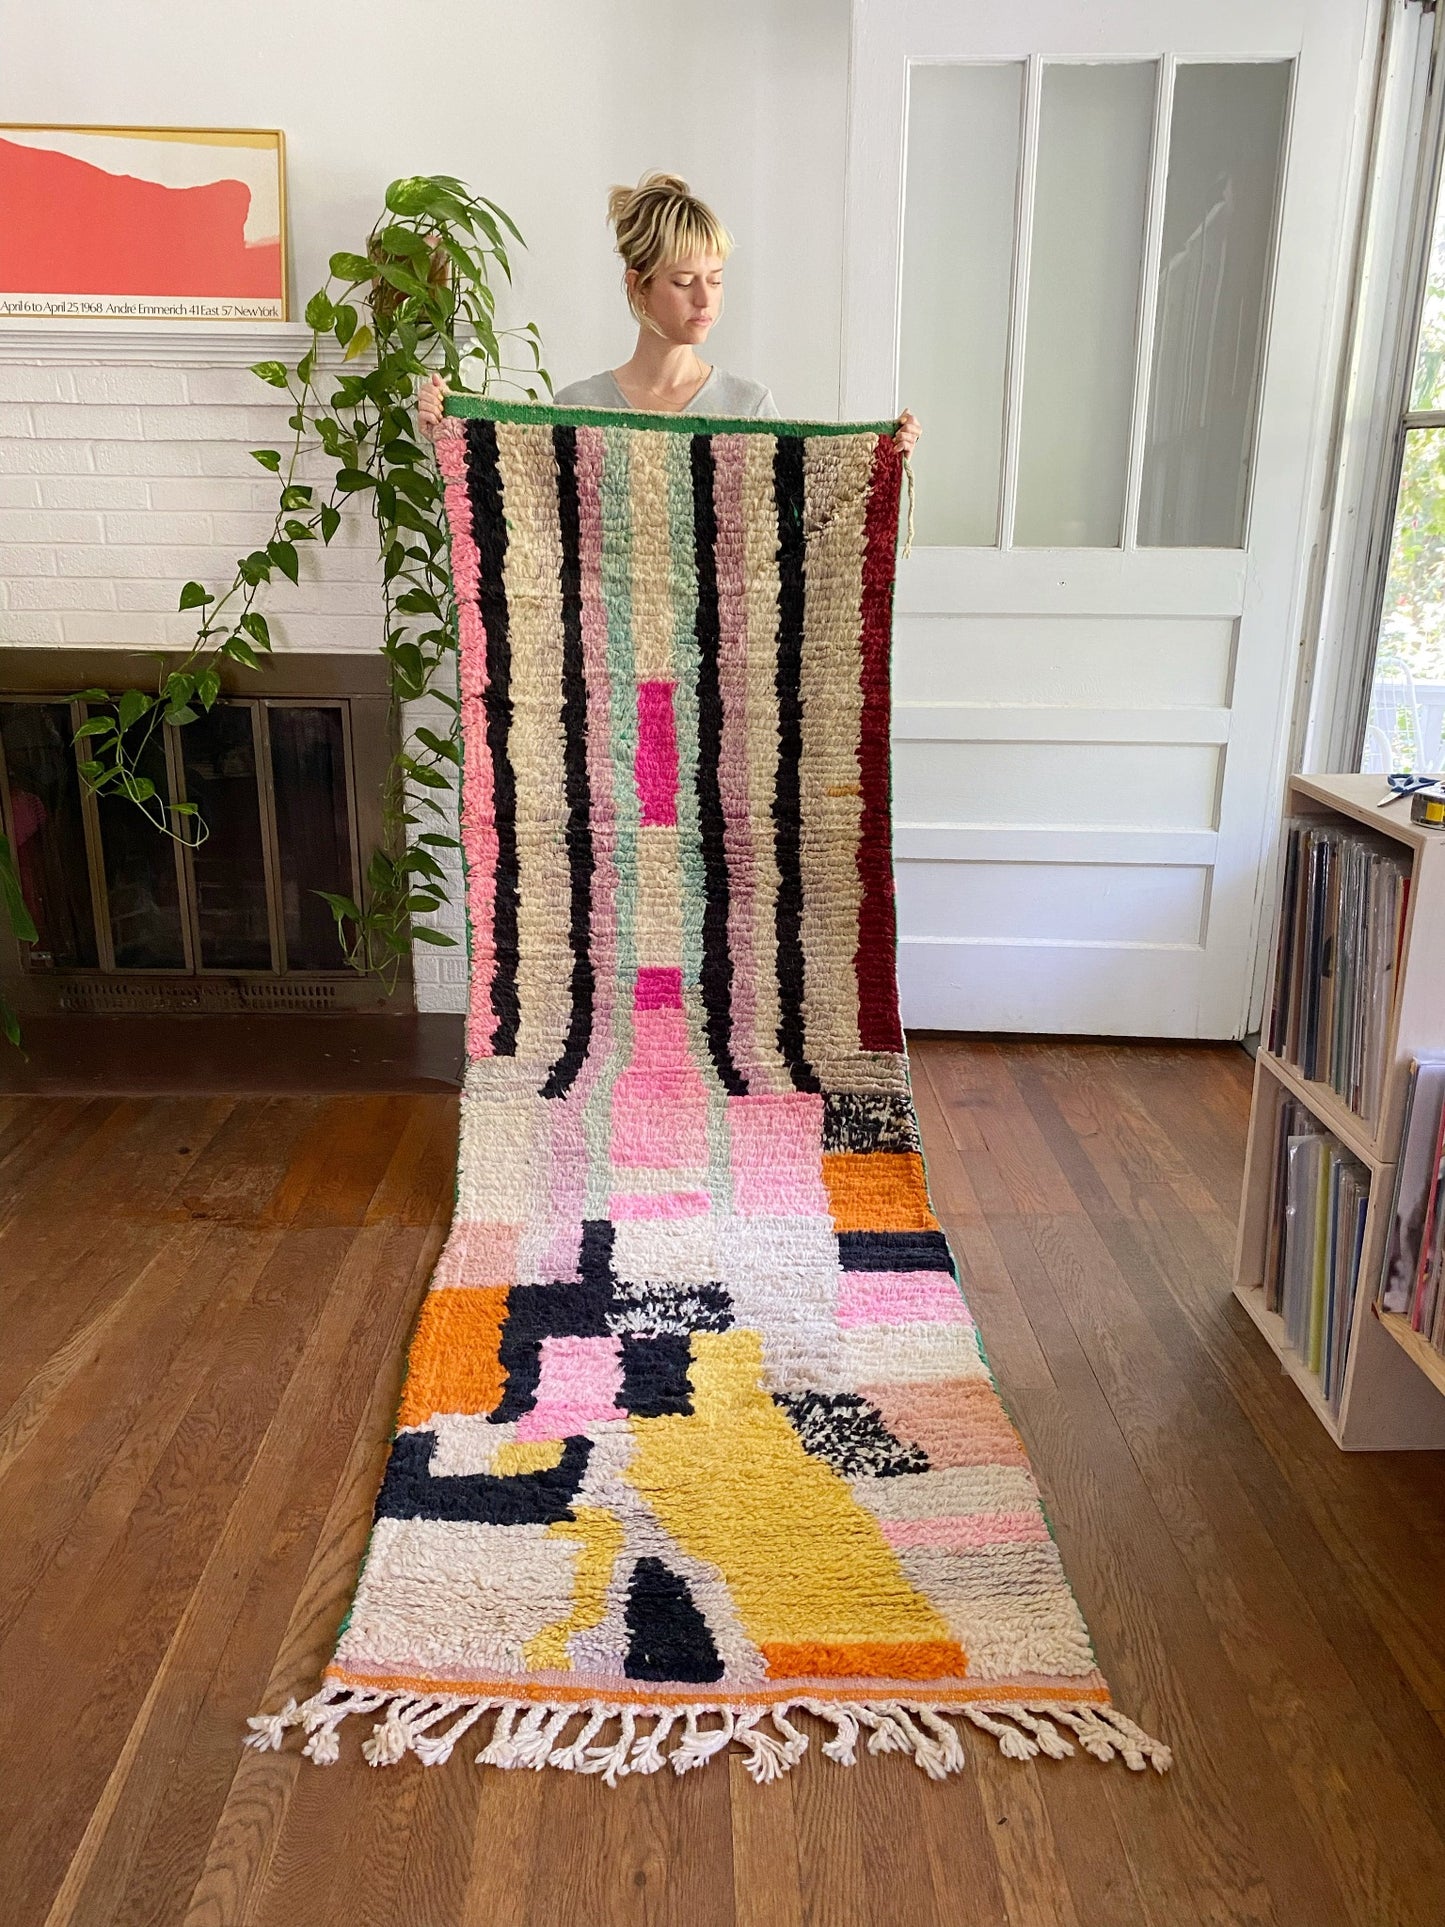 Spritz Moroccan runner is held to highlight the woven stripes and abstract details